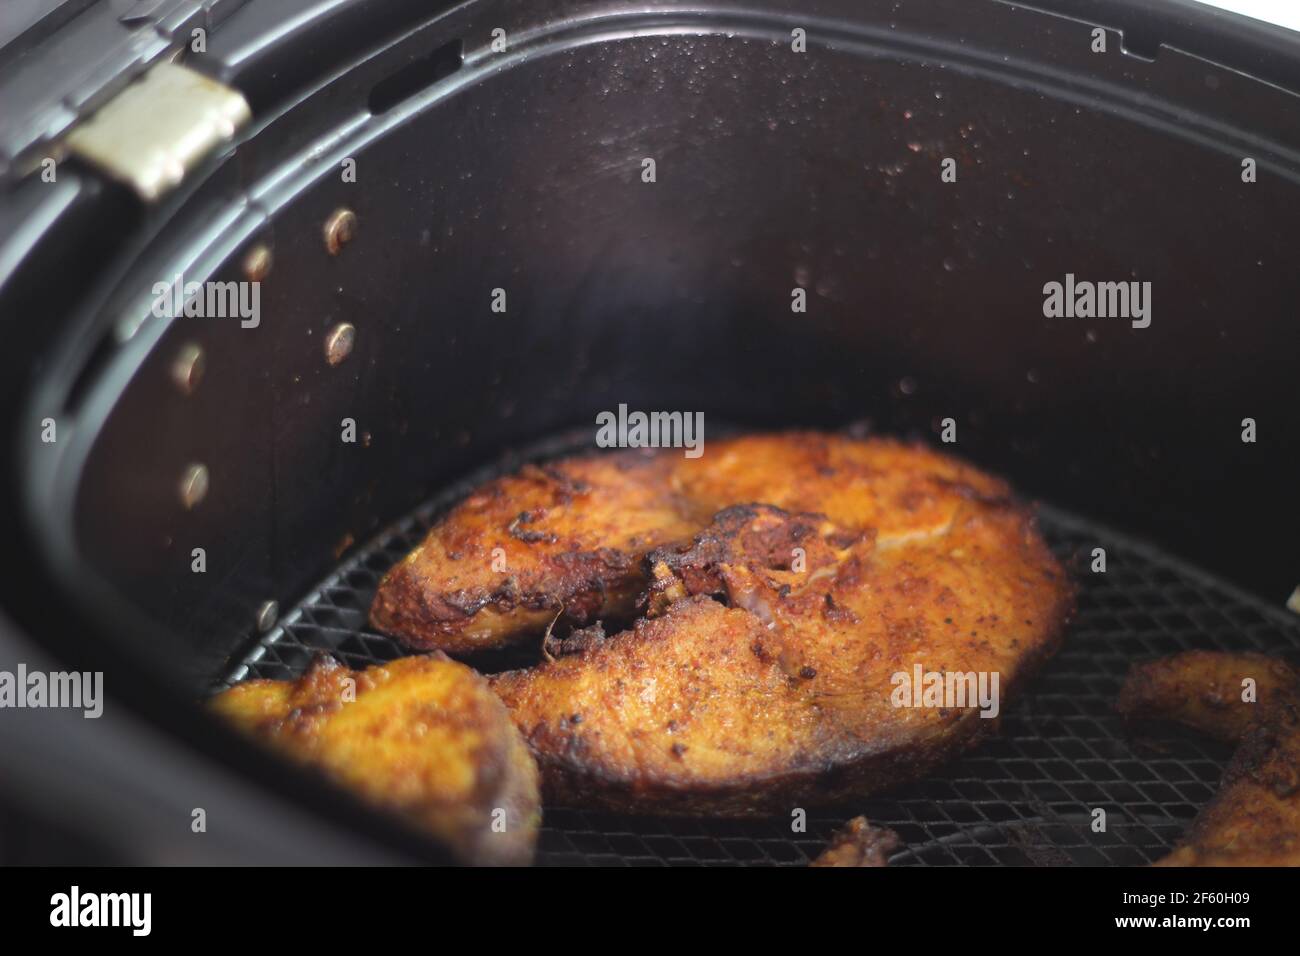 Cobia fish inside the air fryer. In India it is called Moda fish. Other common names include black kingfish, black salmon, ling, lemonfish, crabeater, Stock Photo